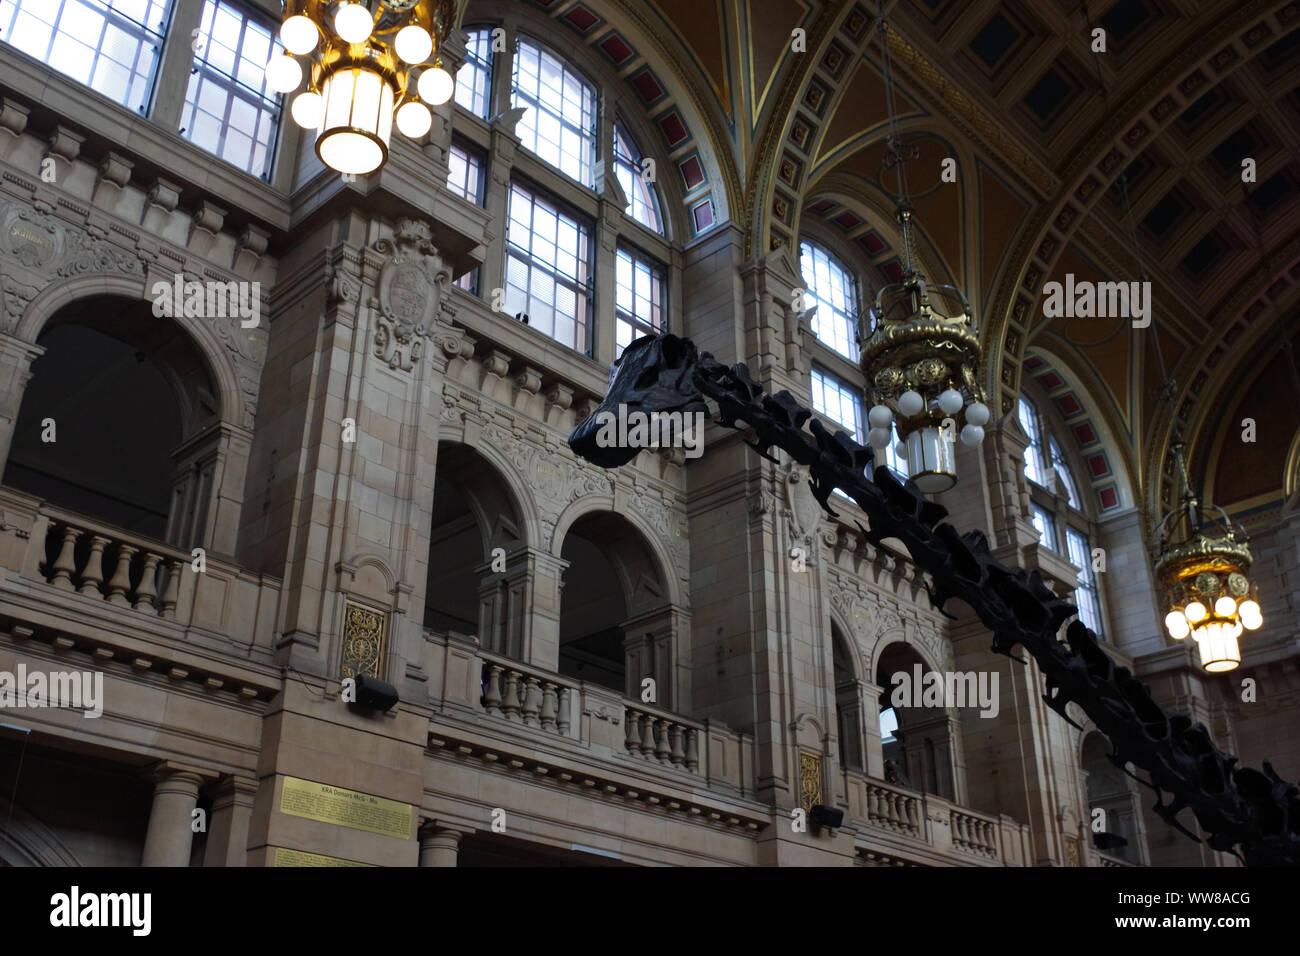 Dippy on display at the Kelvingrove Art Gallery and Museum. The Natural History Museum's iconic Diplodocus cast Stock Photo